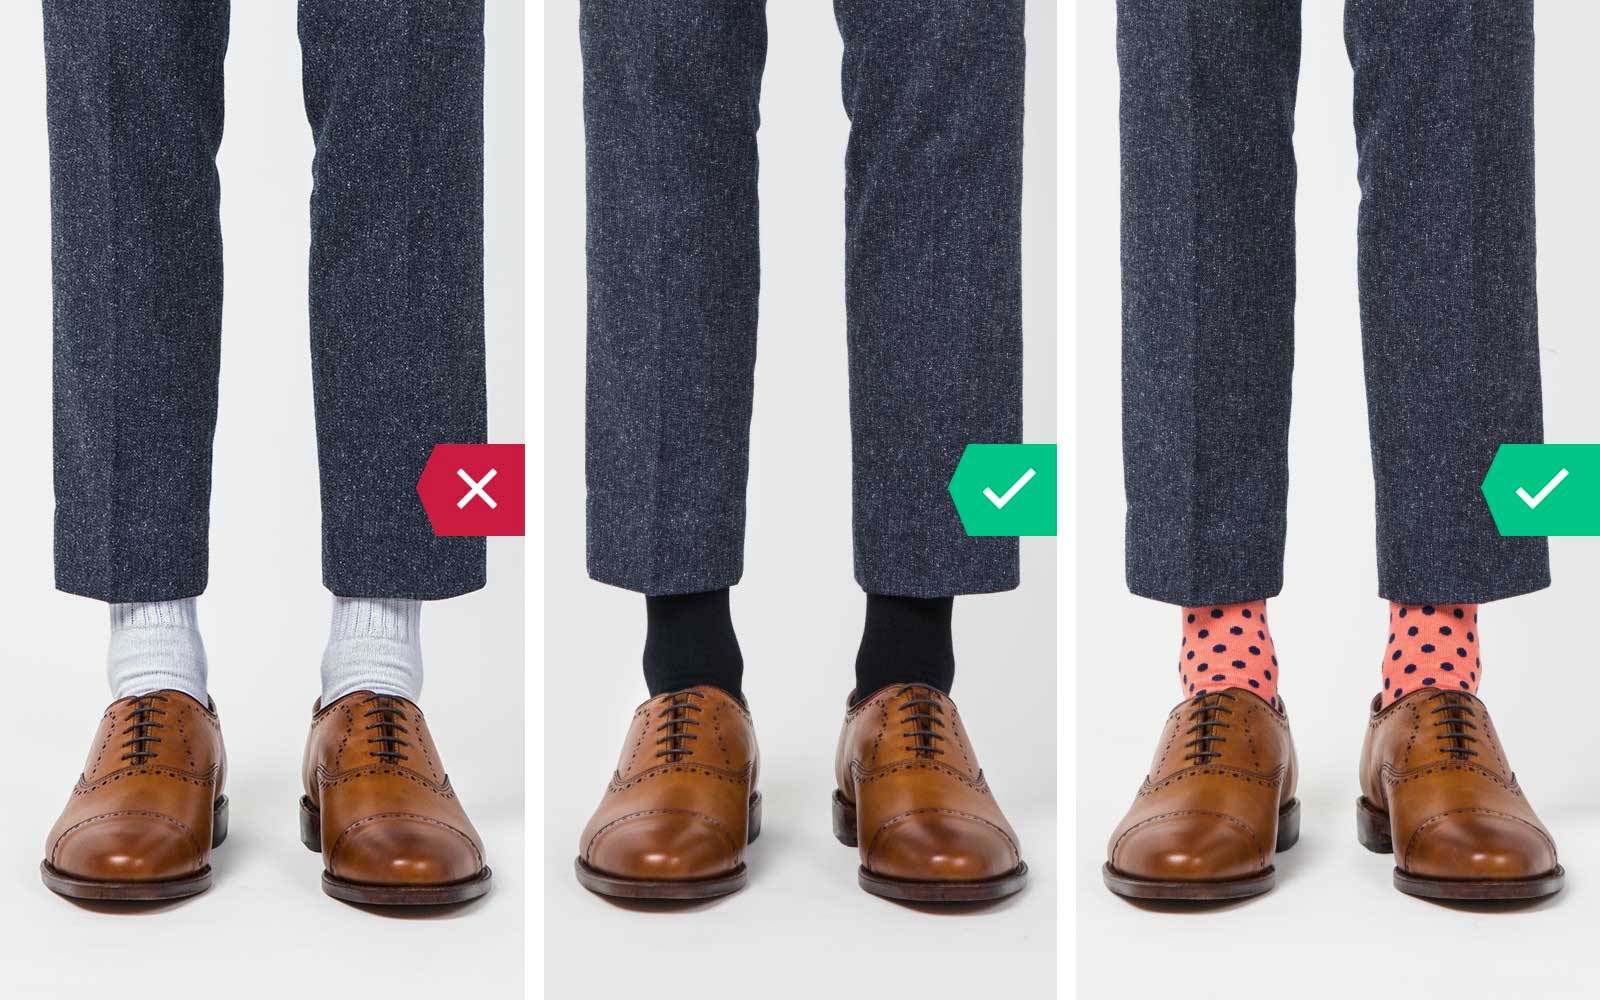 Wearing white socks with dress pants is not OK. Wearing dark and solid or playful socks with dress pants are OK.